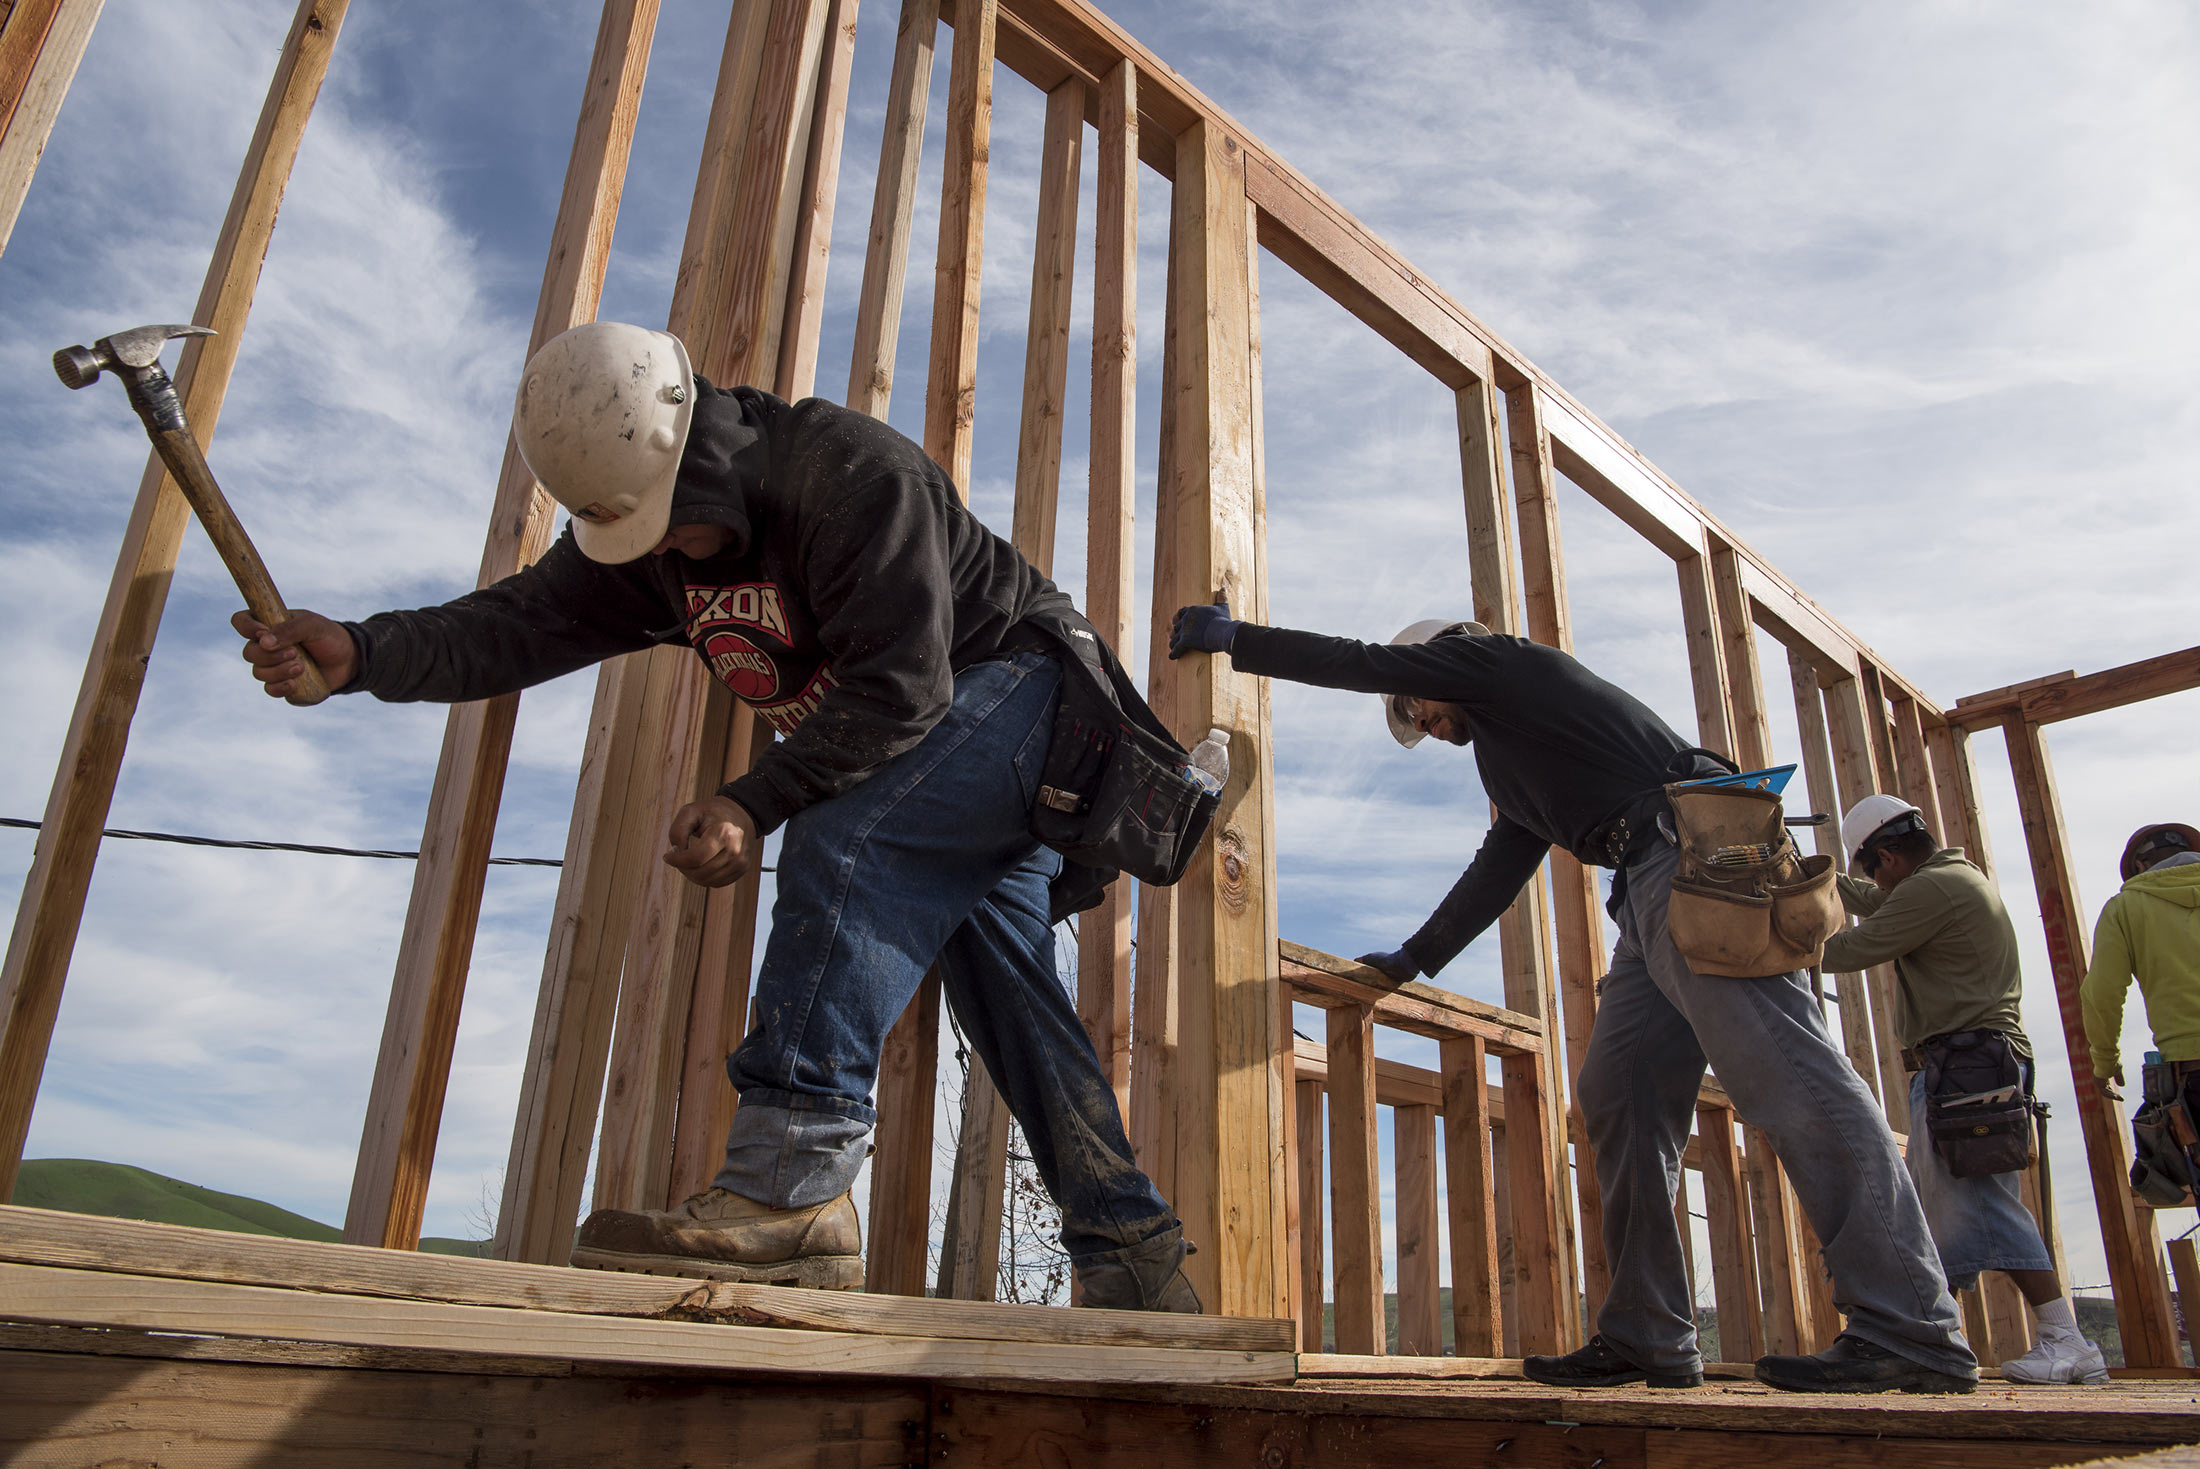 Contractors secure a wall section on a home under construction at the Toll Brothers Inc. Cantera at Gale Ranch housing development in San Ramon, California, U.S., on Wednesday, Jan. 20, 2016. The U.S. Census Bureau reported a drop in new-home construction for December which probably reflects little more than a pause in a steady uptrend, as housing starts closed out the strongest year since 2007.
